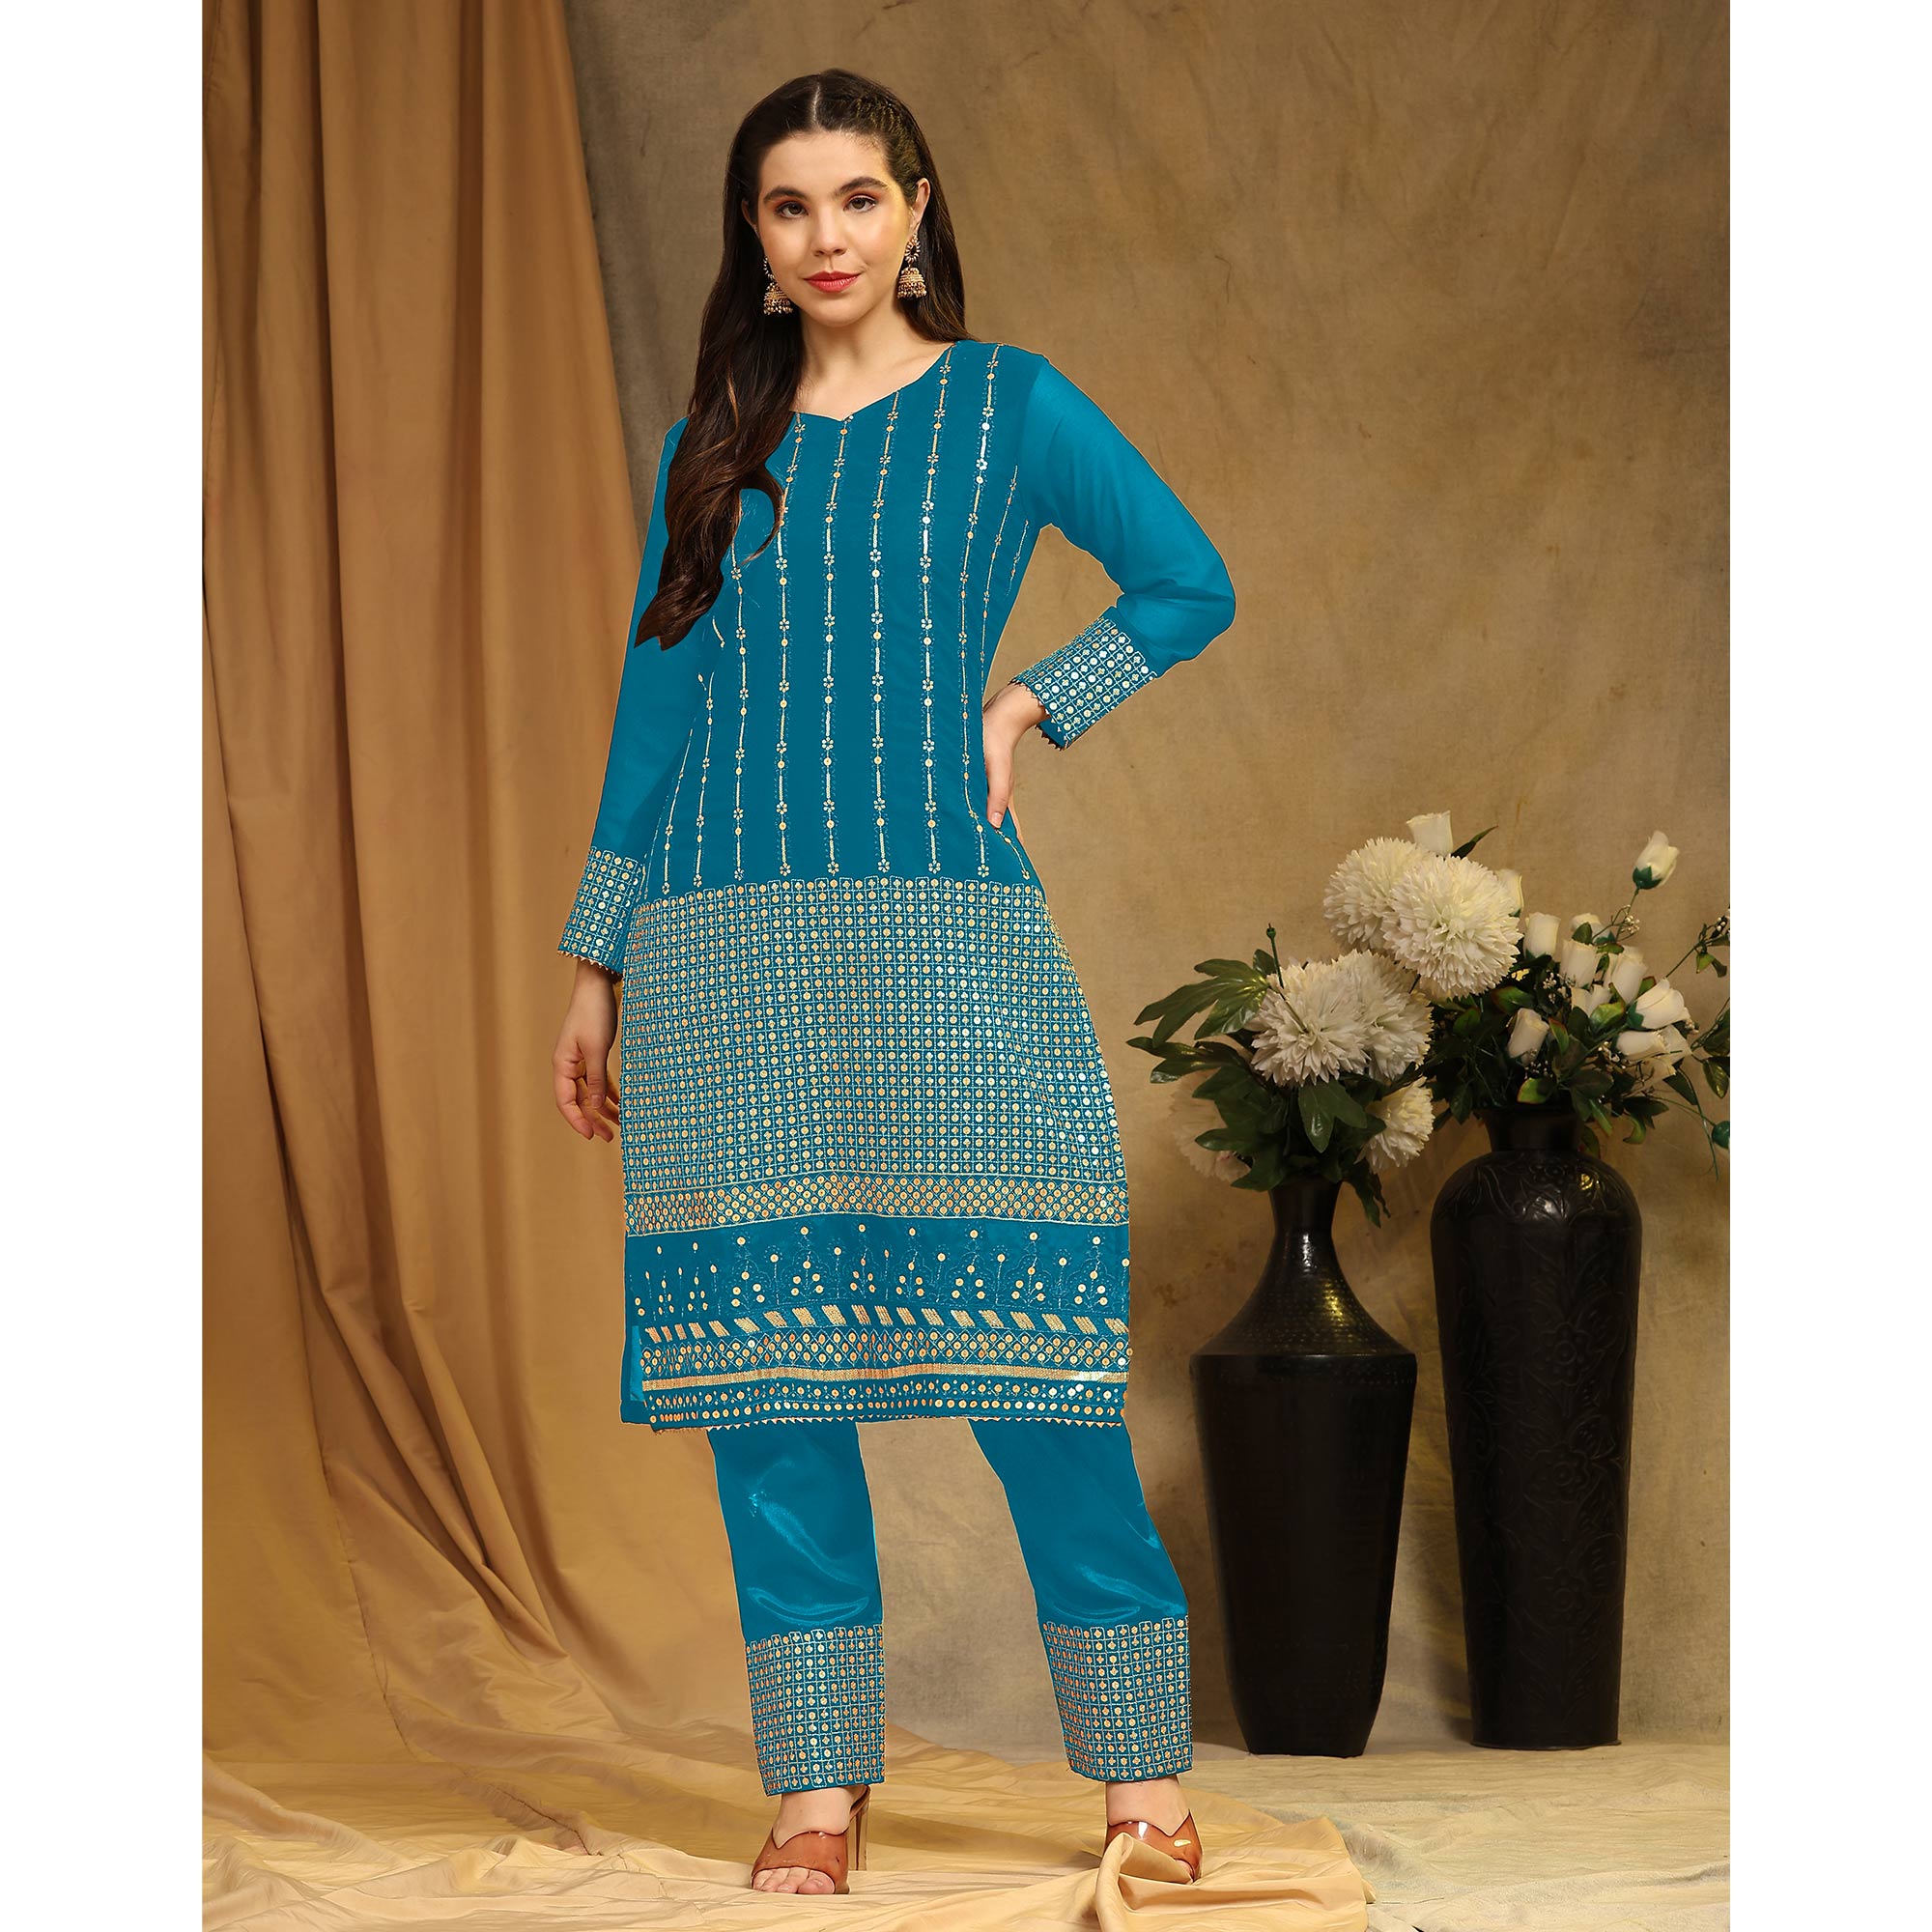 Rama Blue Sequins Embroidered Georgette Semi Stitched Salwar Suit